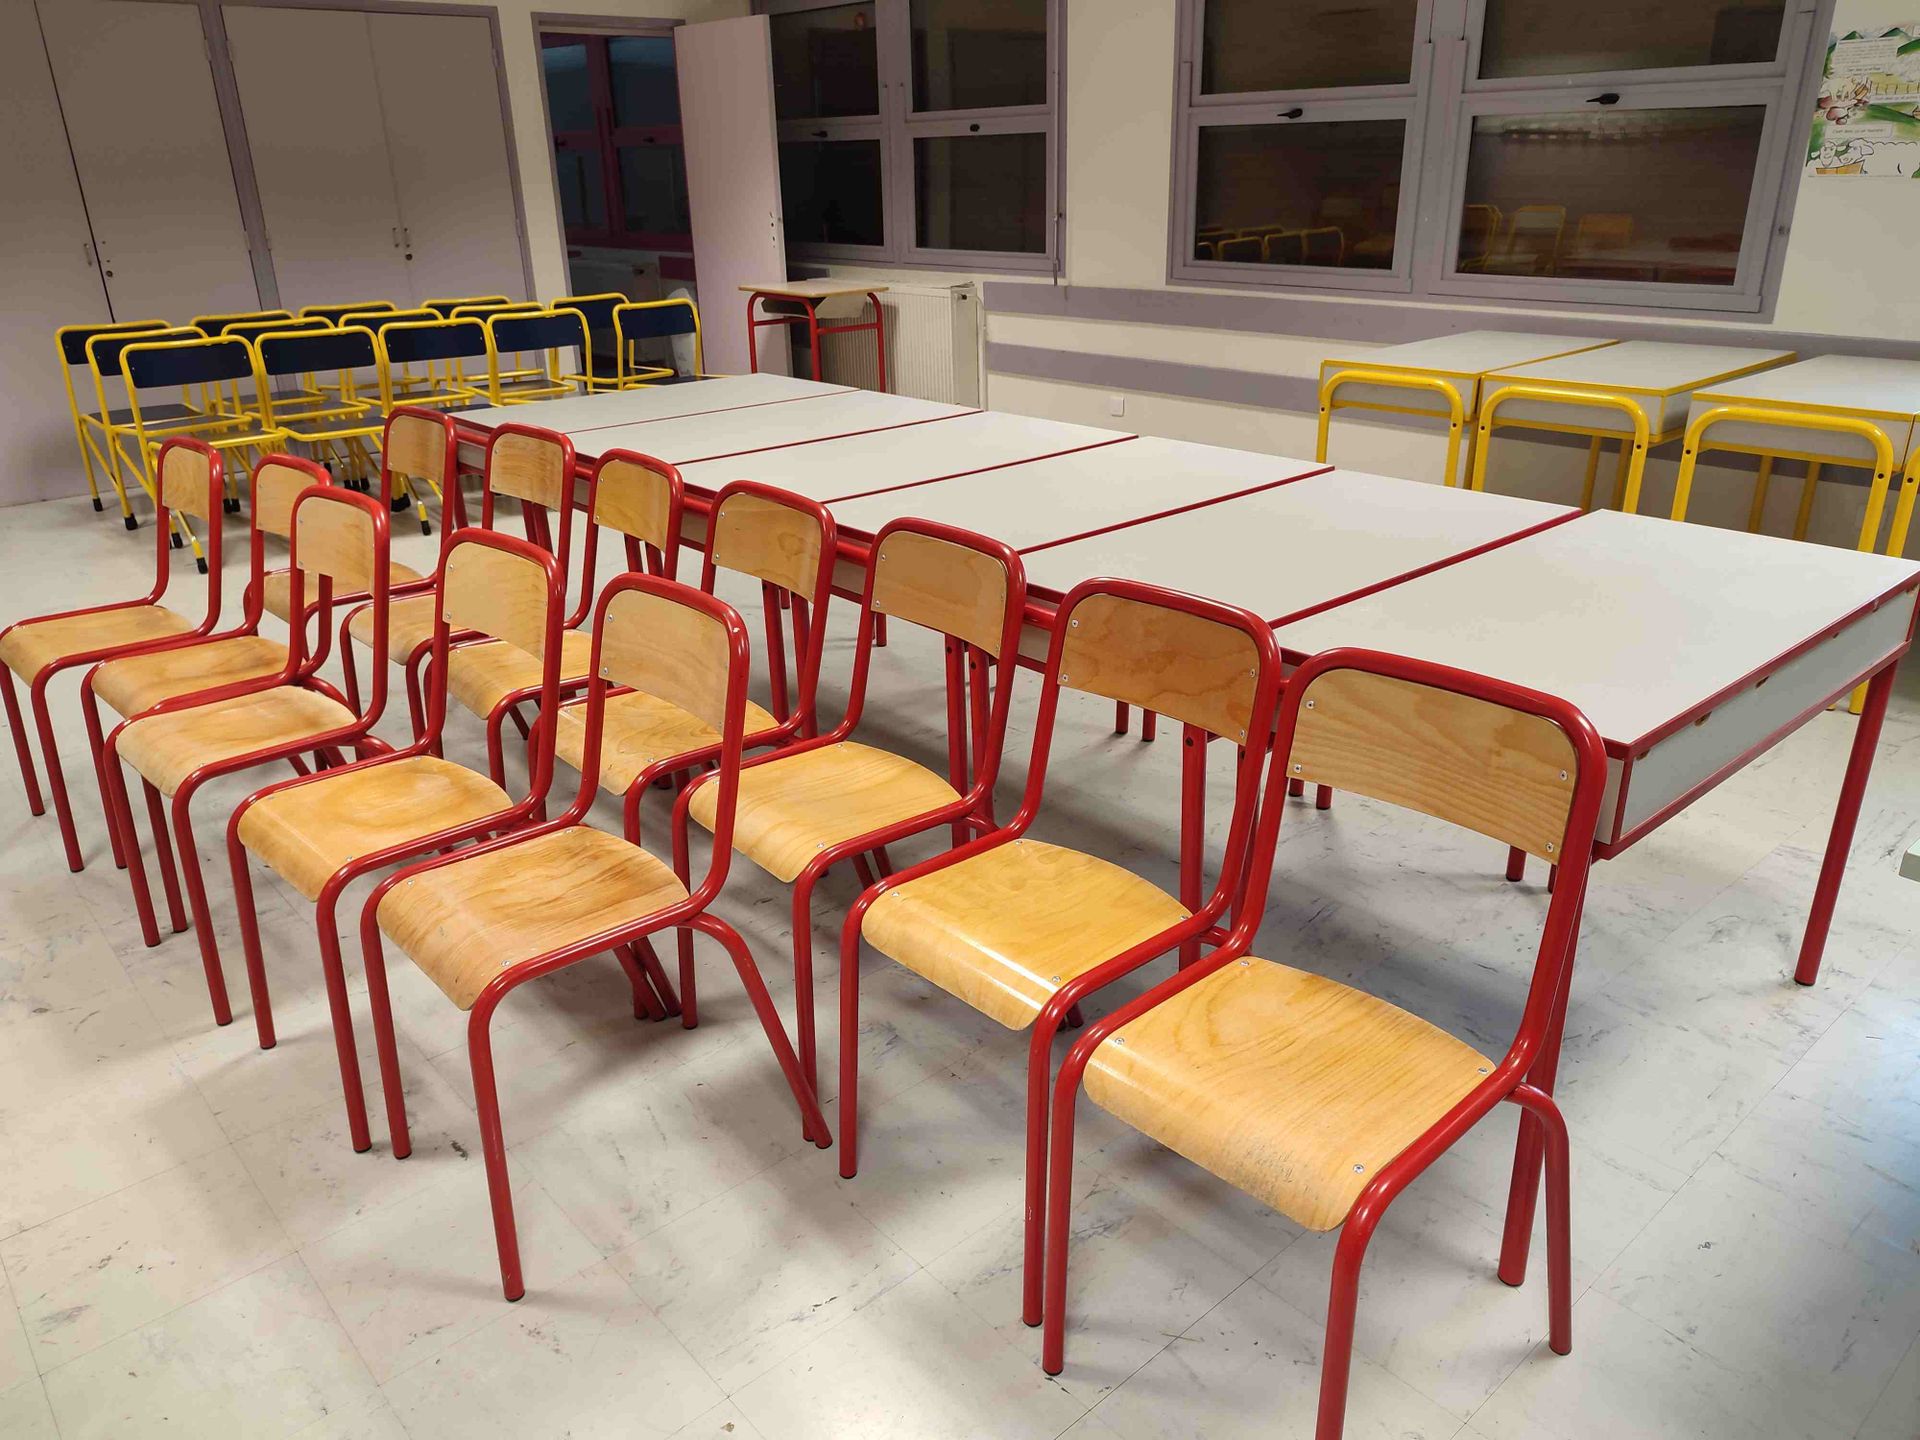 Null Classroom furniture set in used condition including:
- 38 chairs (various m&hellip;